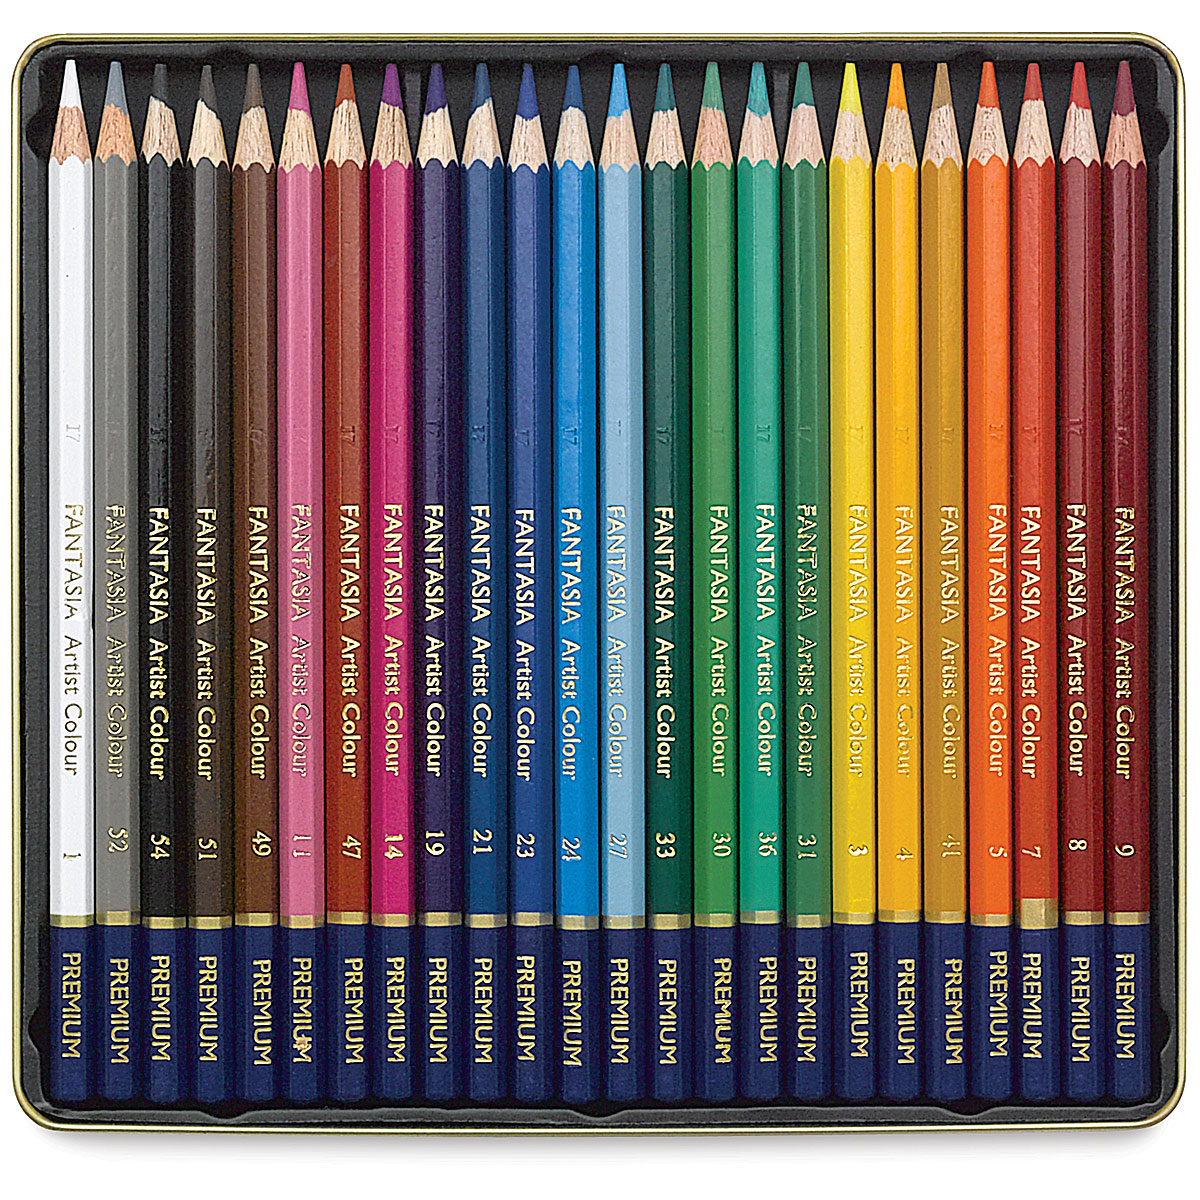 Colouring pencils set of 36 colours, Professional Quality drawing pencils